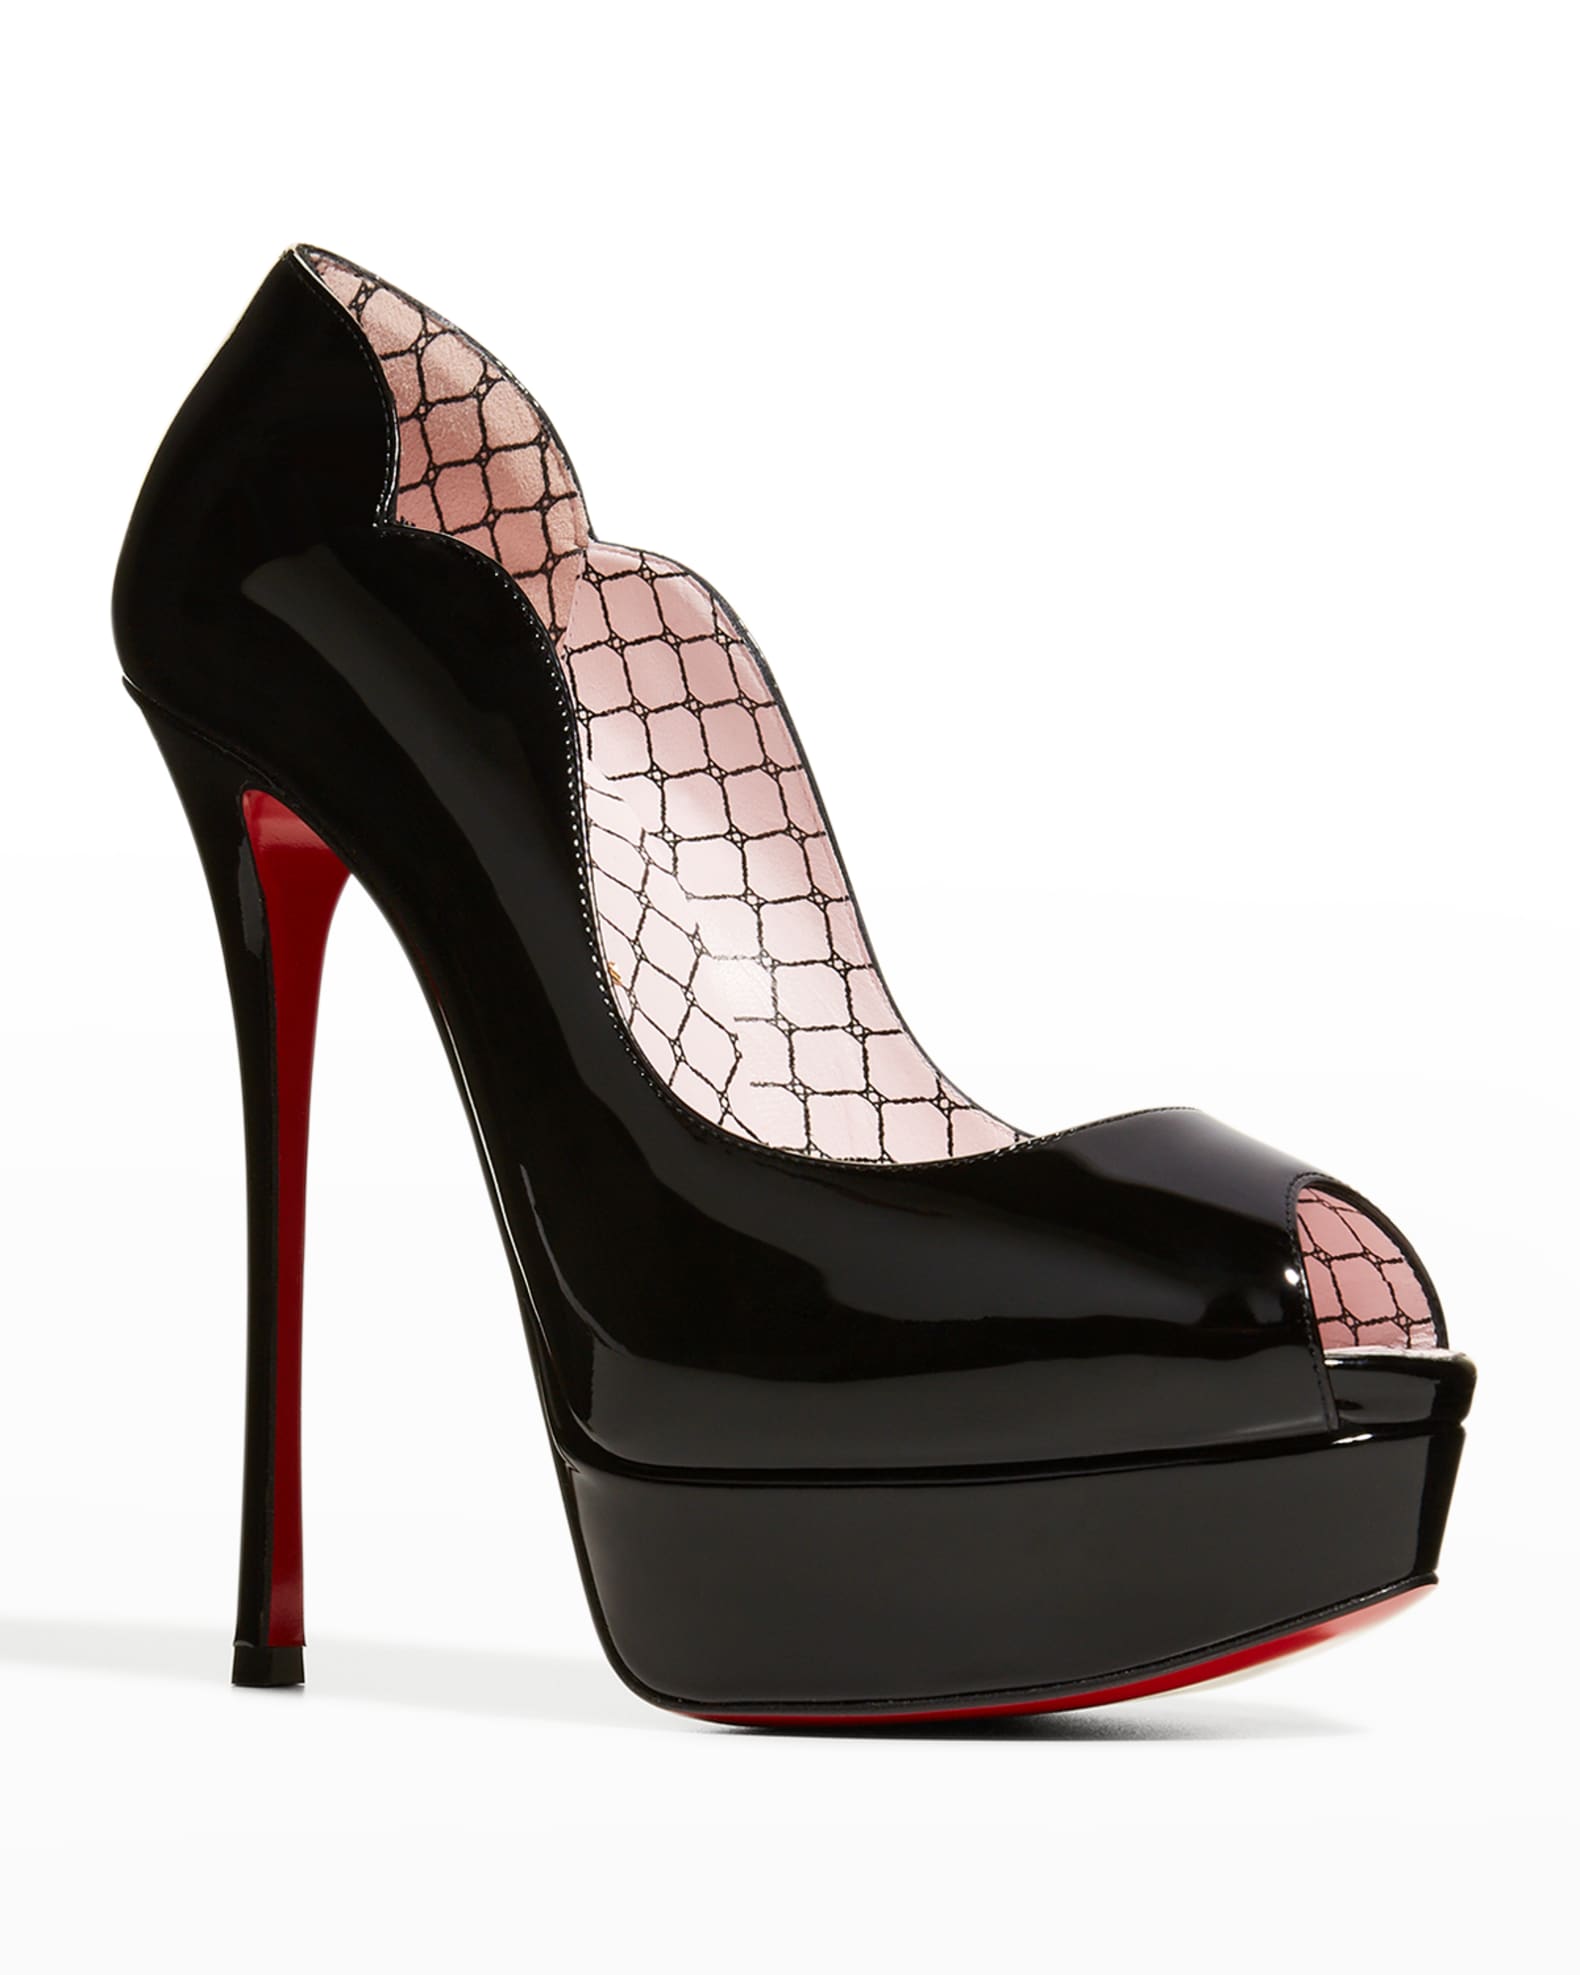 Christian Louboutin Chick Up Alta Patent Red Sole Pumps | Neiman Marcus